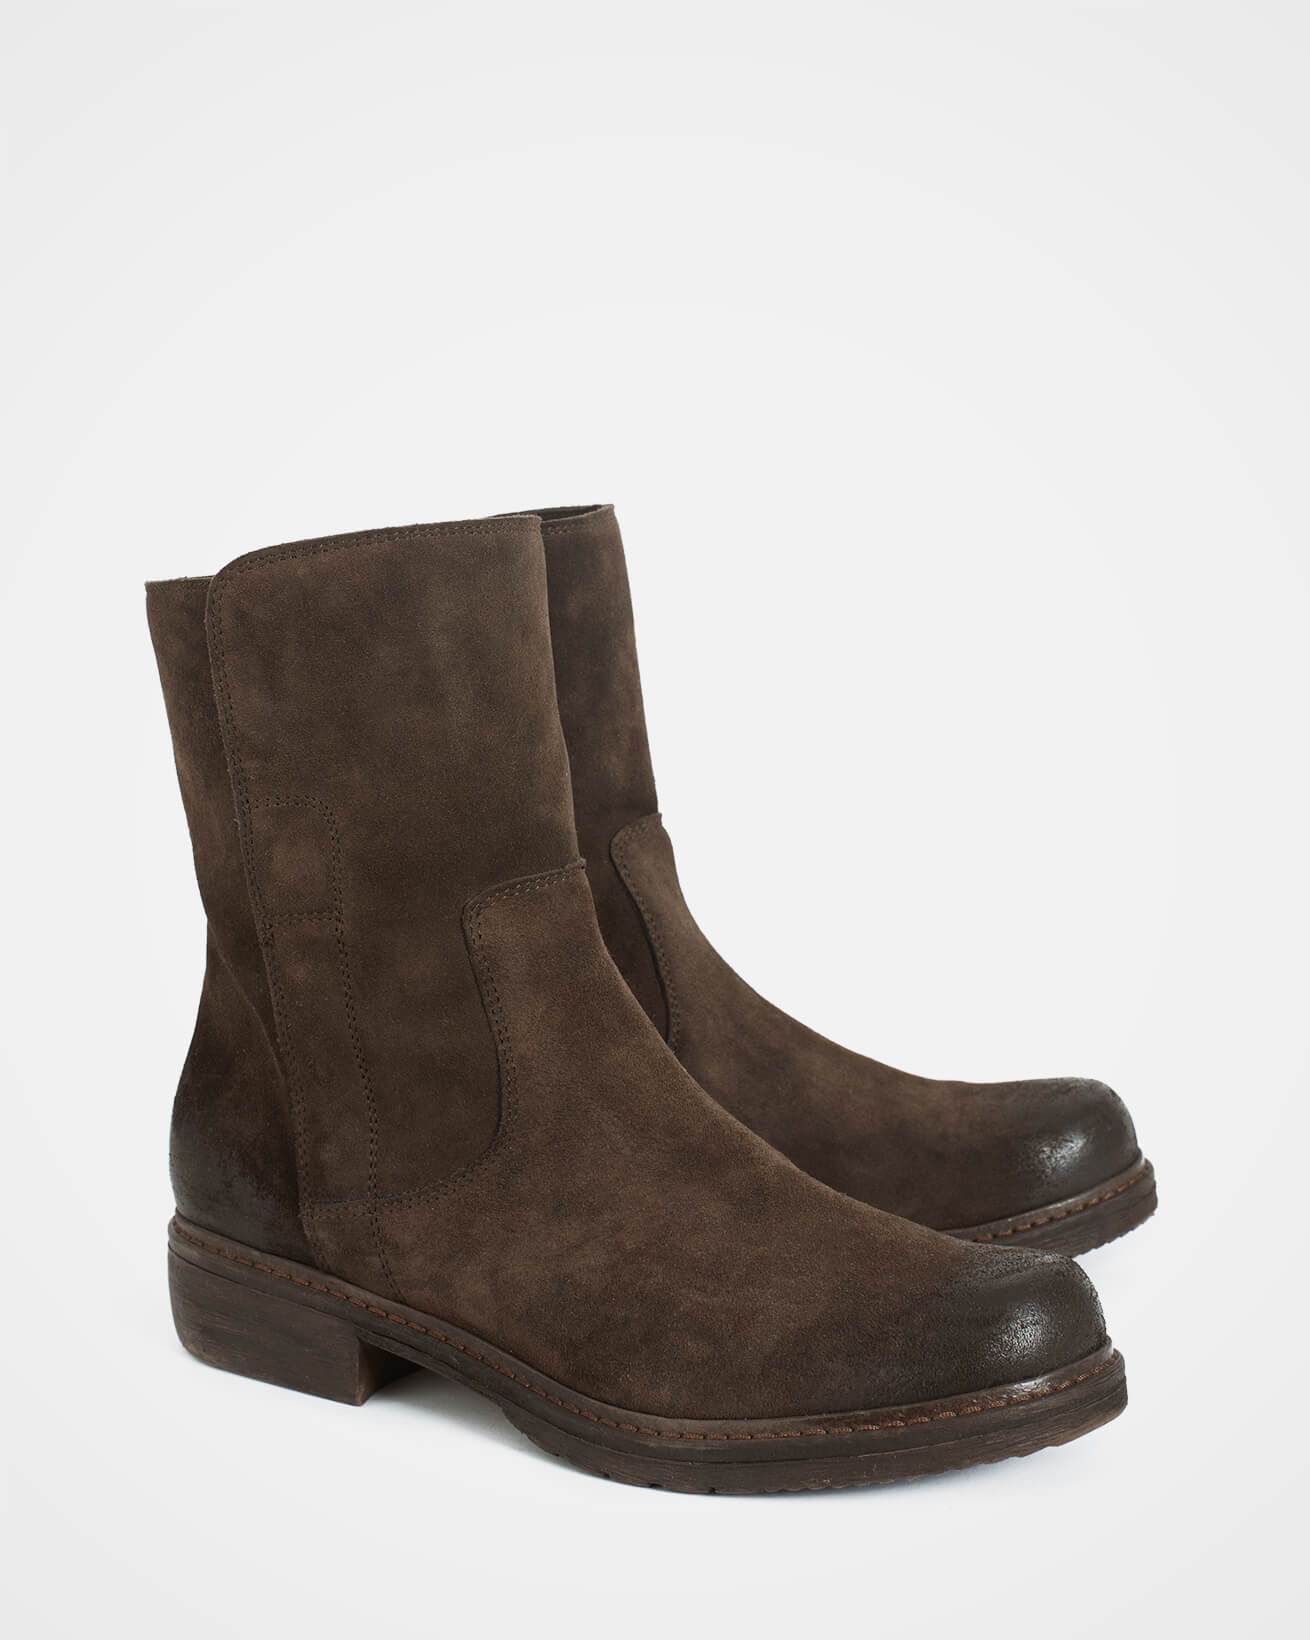 7281_essential-ankle-boot_chocolate_pair_v2_web.jpg